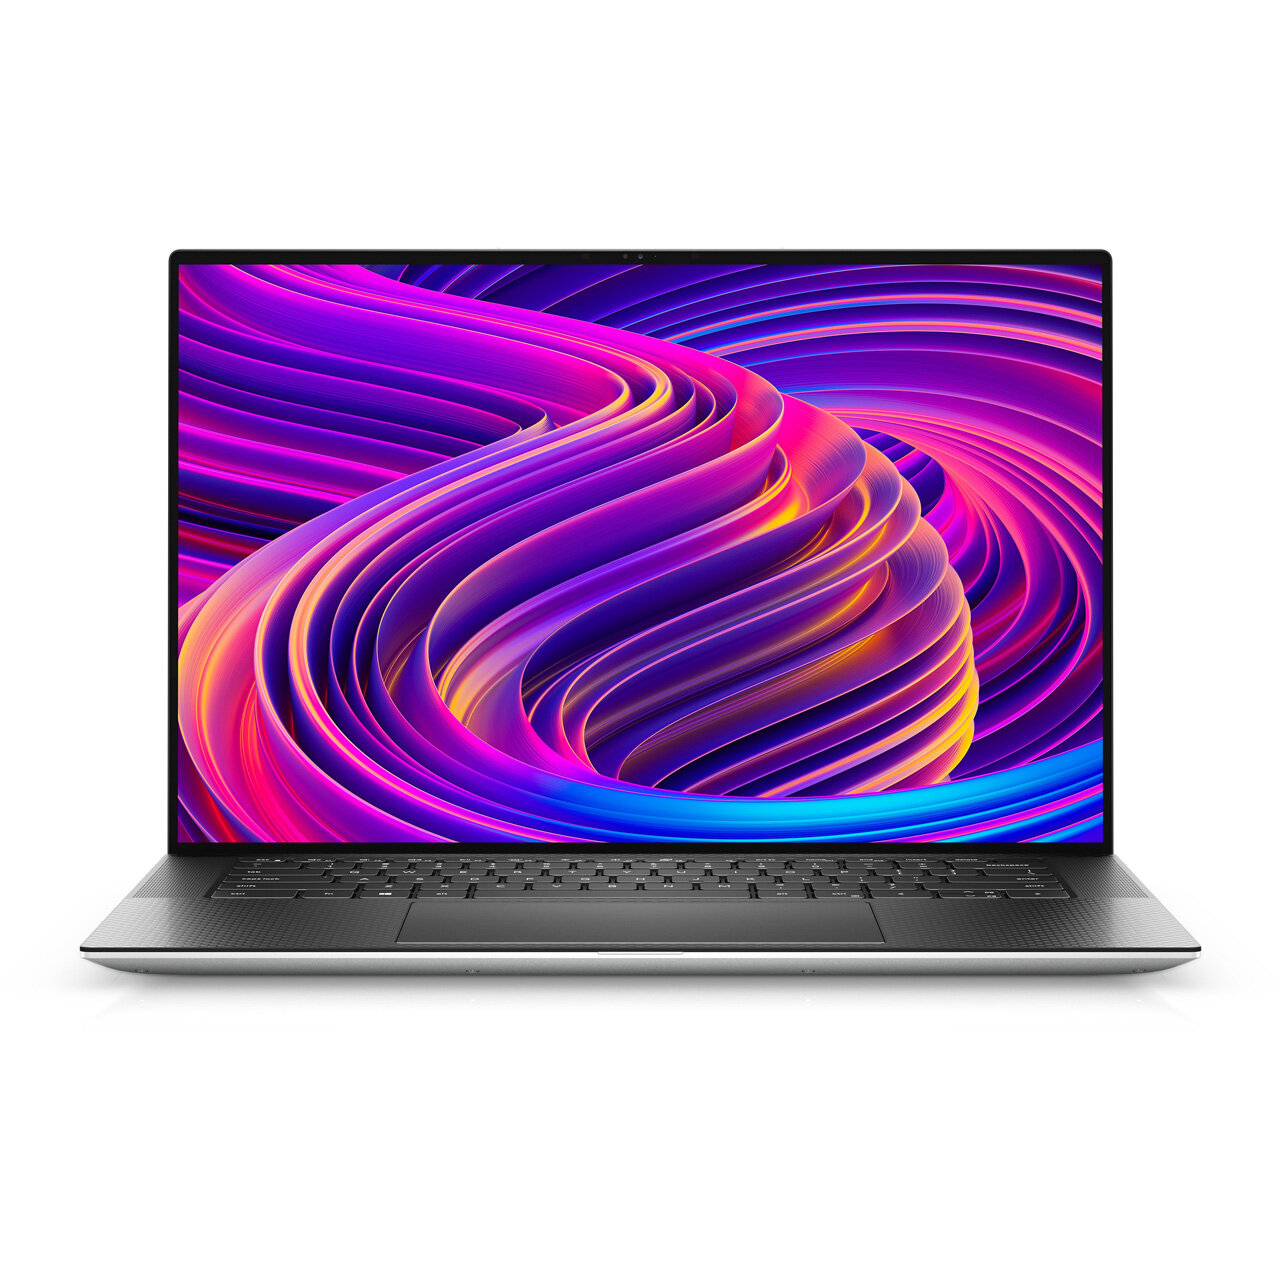 Dell XPS 15 9510 FHD+ i7 32GB 1TB RTX3050 W10 Outlet